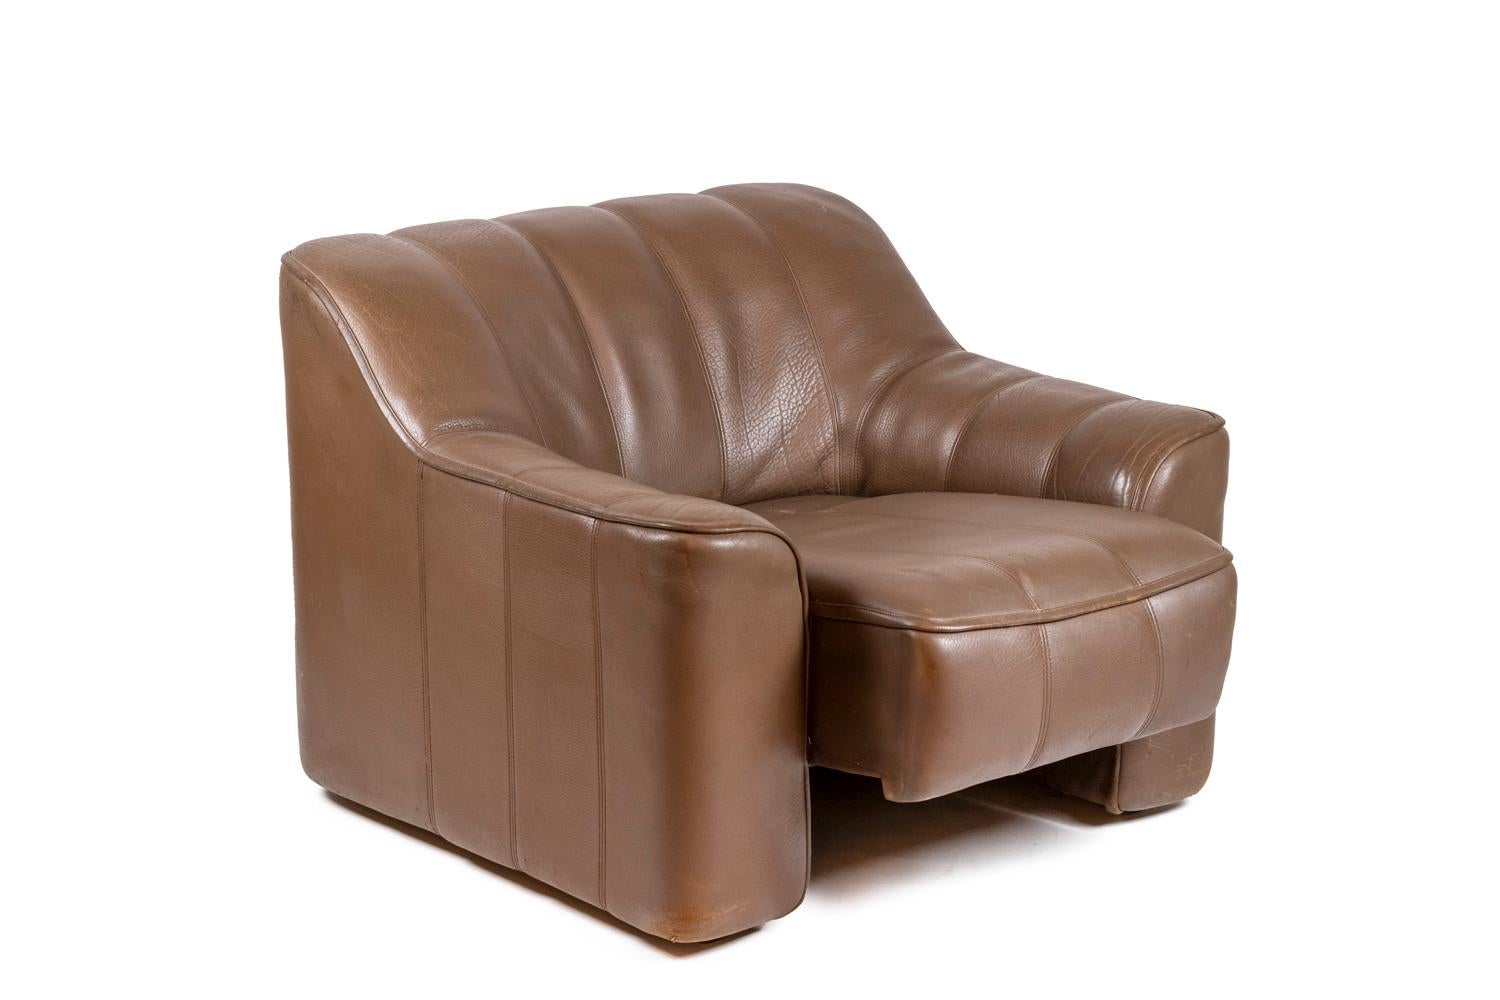 European Armchair and Ottoman in Leather, 1970s For Sale